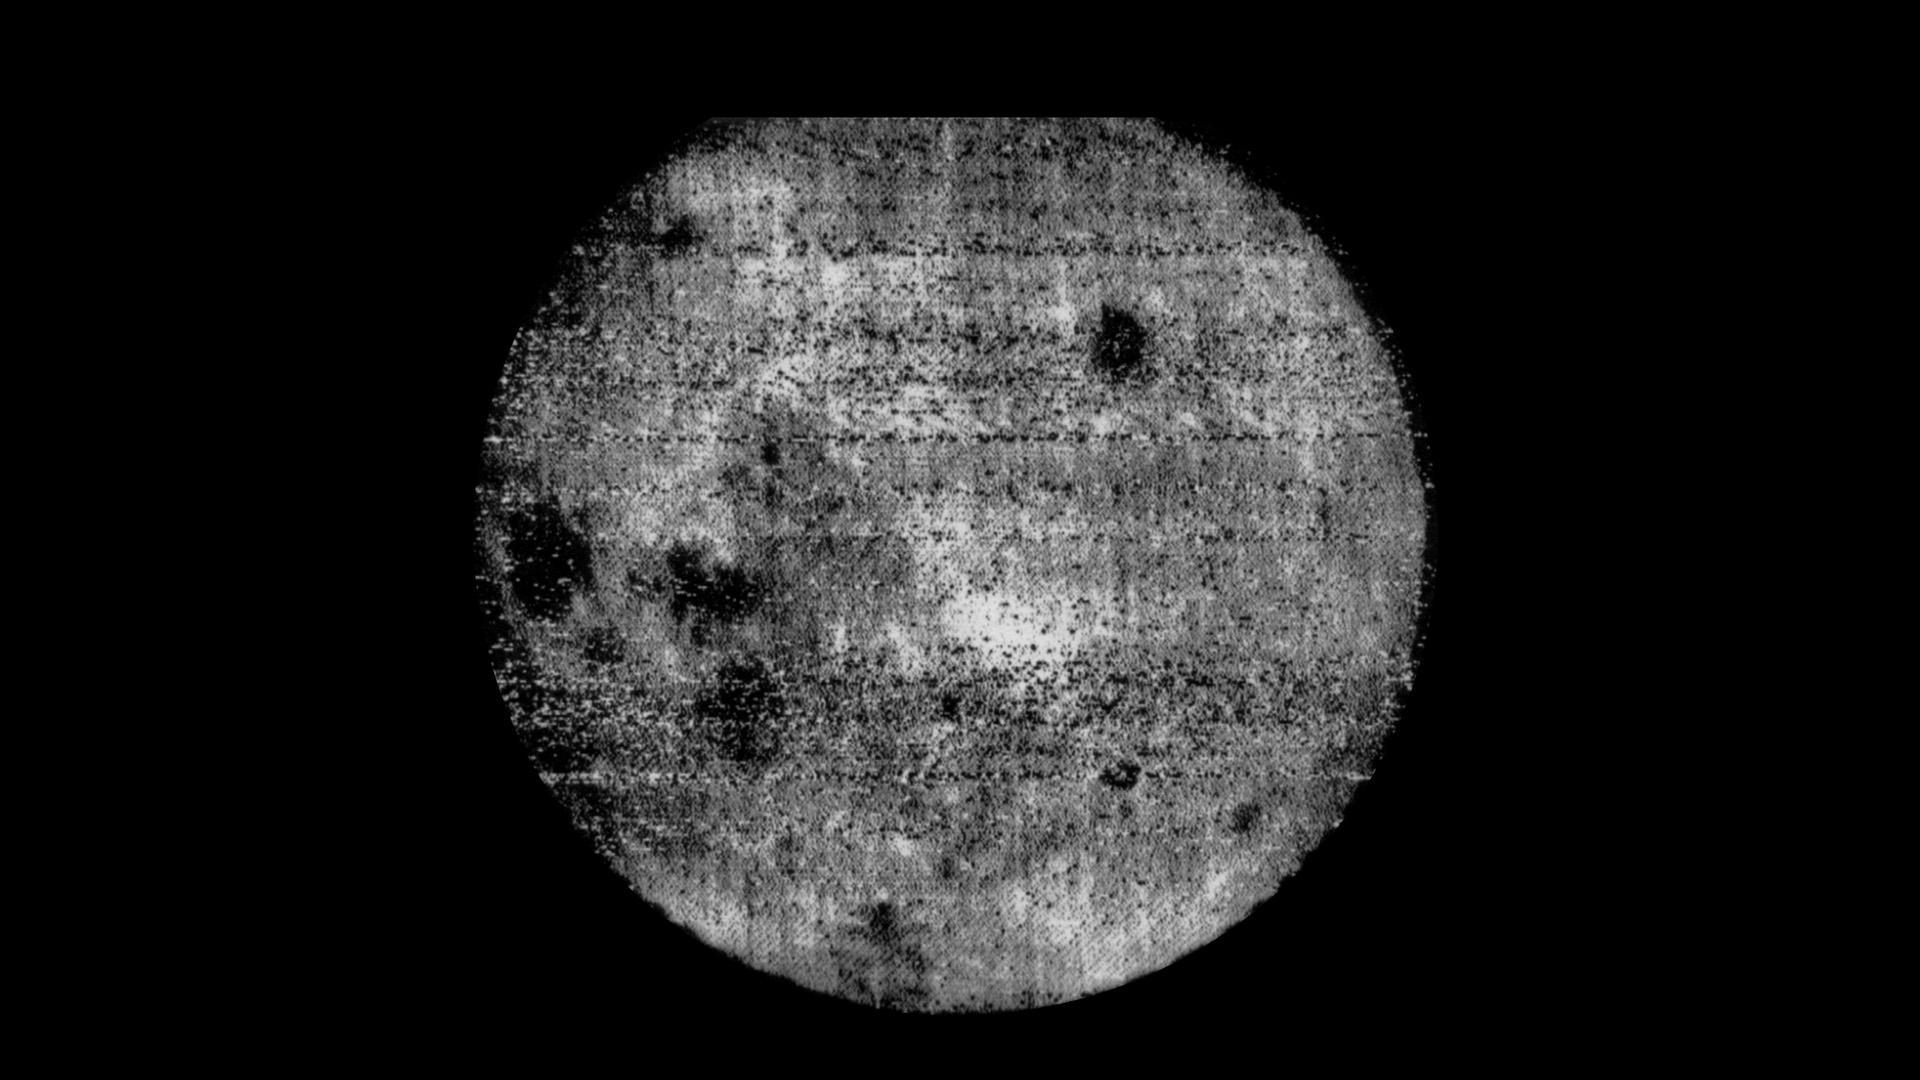 One of the First images of the Far side of the Moon by Luna 3.